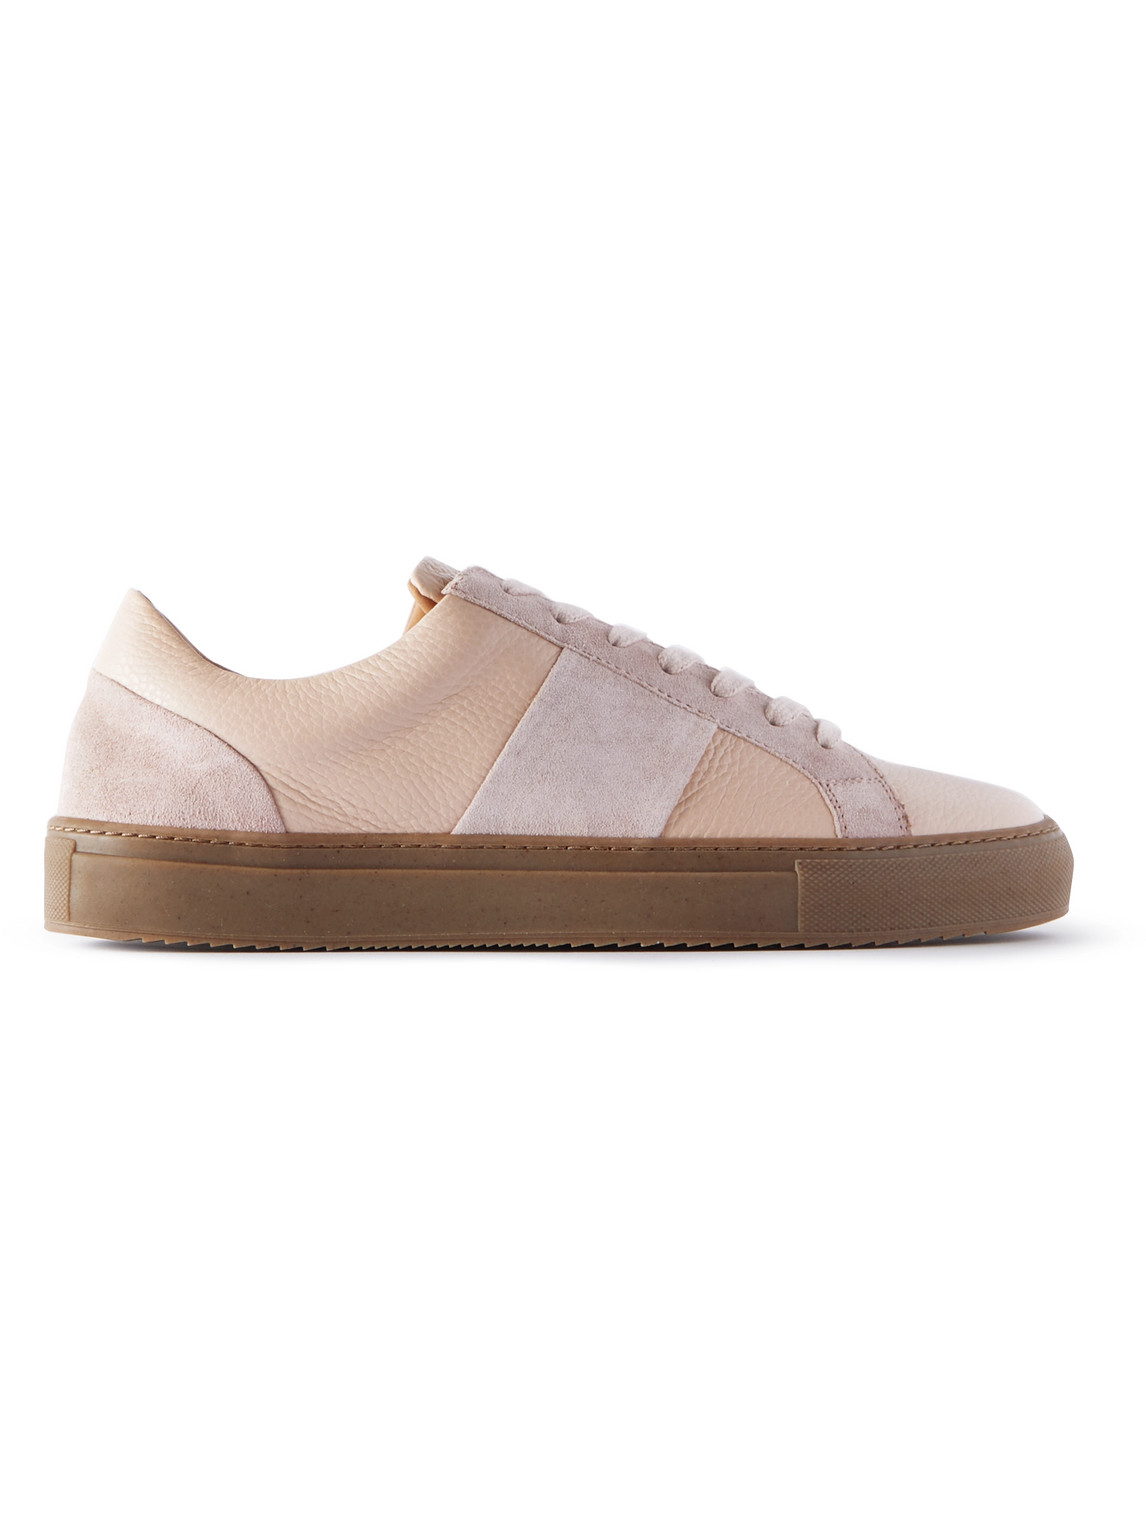 Mr P. Larry Regenerated Suede By Evolo® And Full-grain Leather Sneakers In Pink